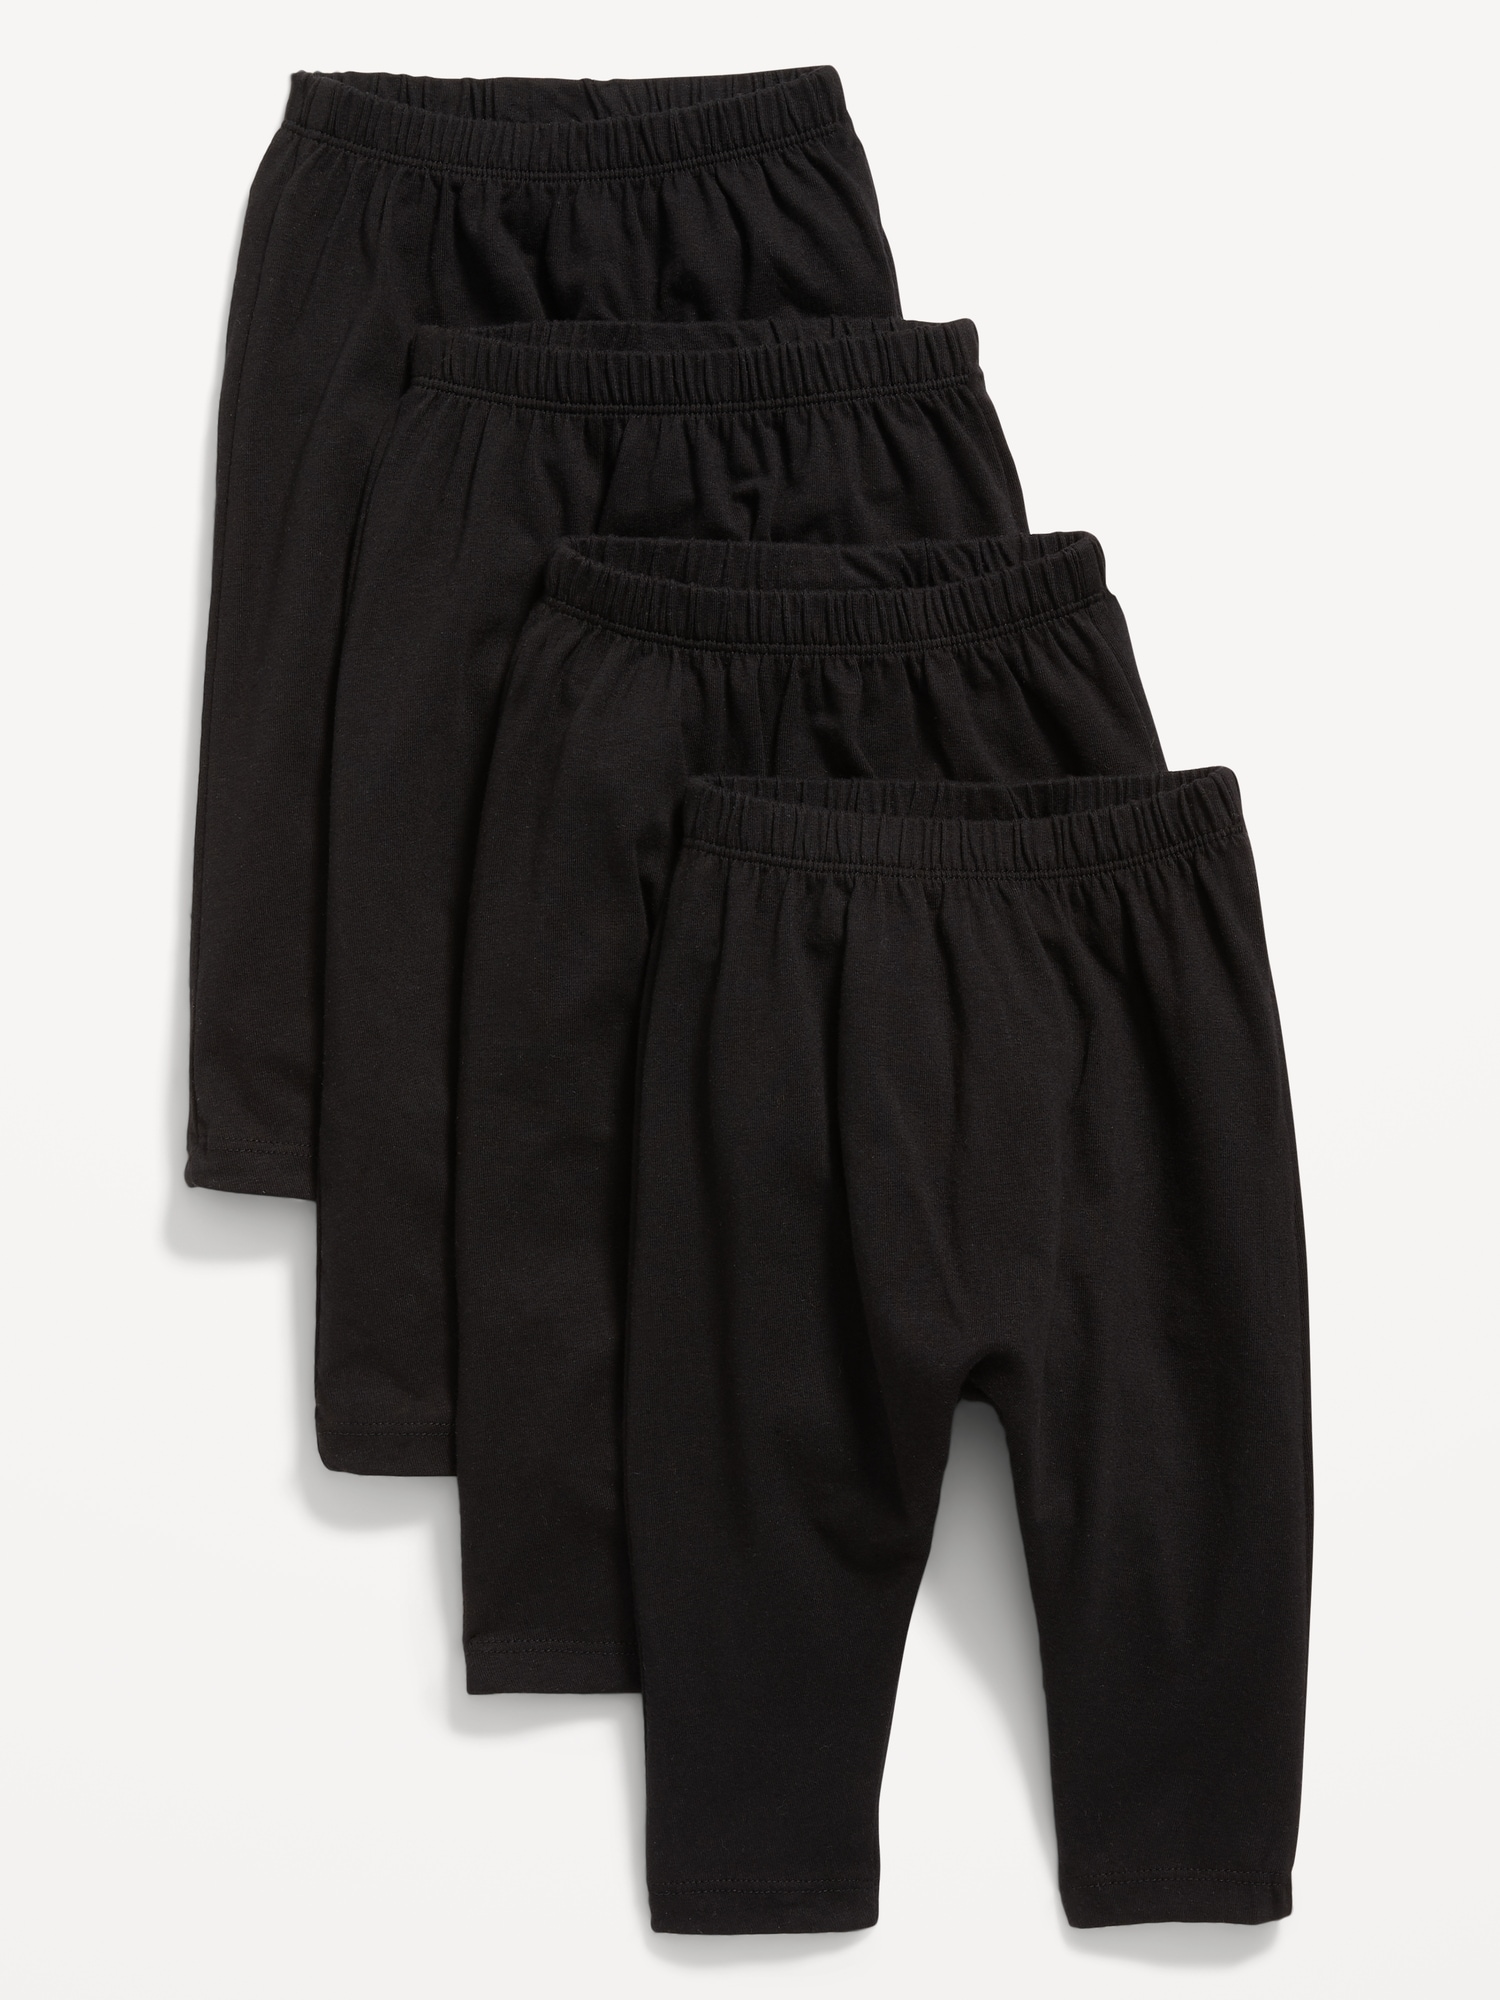 Old Navy Unisex 4-Pack U-Shaped Jersey Pants for Baby black. 1